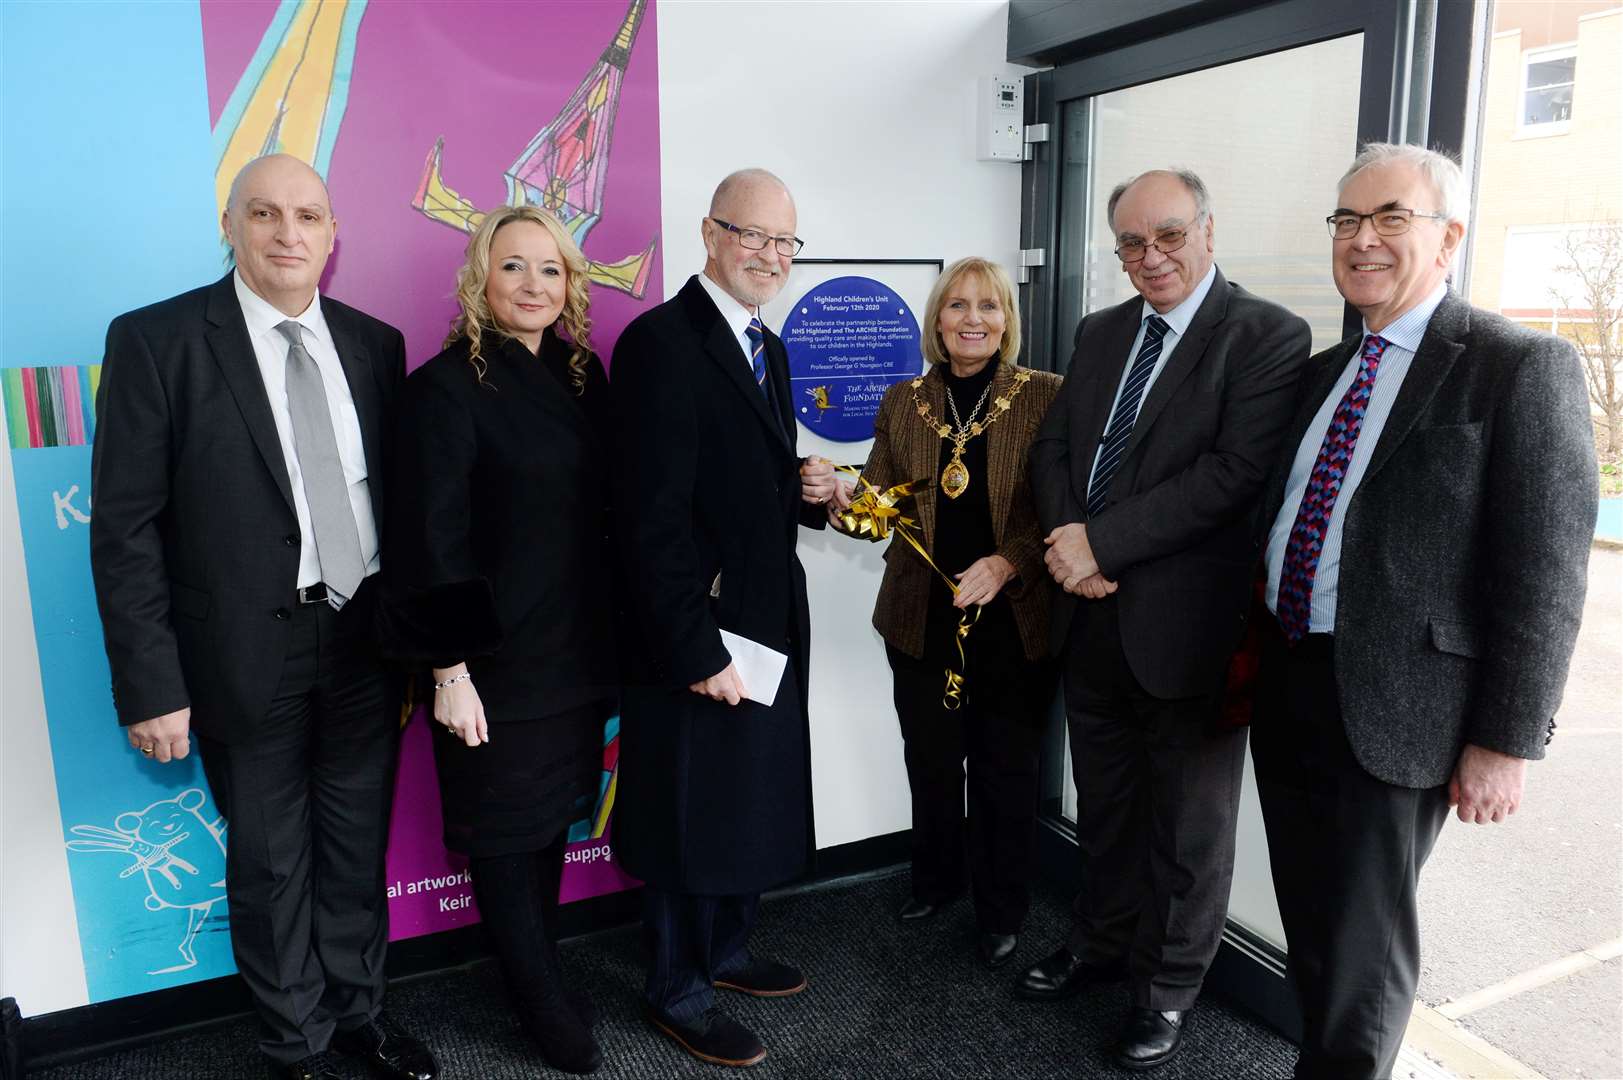 Celebrating the unveiling of the plaque are NHS Highland chief executive Paul Hawkins, Mary Nimmo, George Youngson, Inverness Provost Helen Carmichael, David Sutherland and NHS Highland chairman Boyd Robertson.